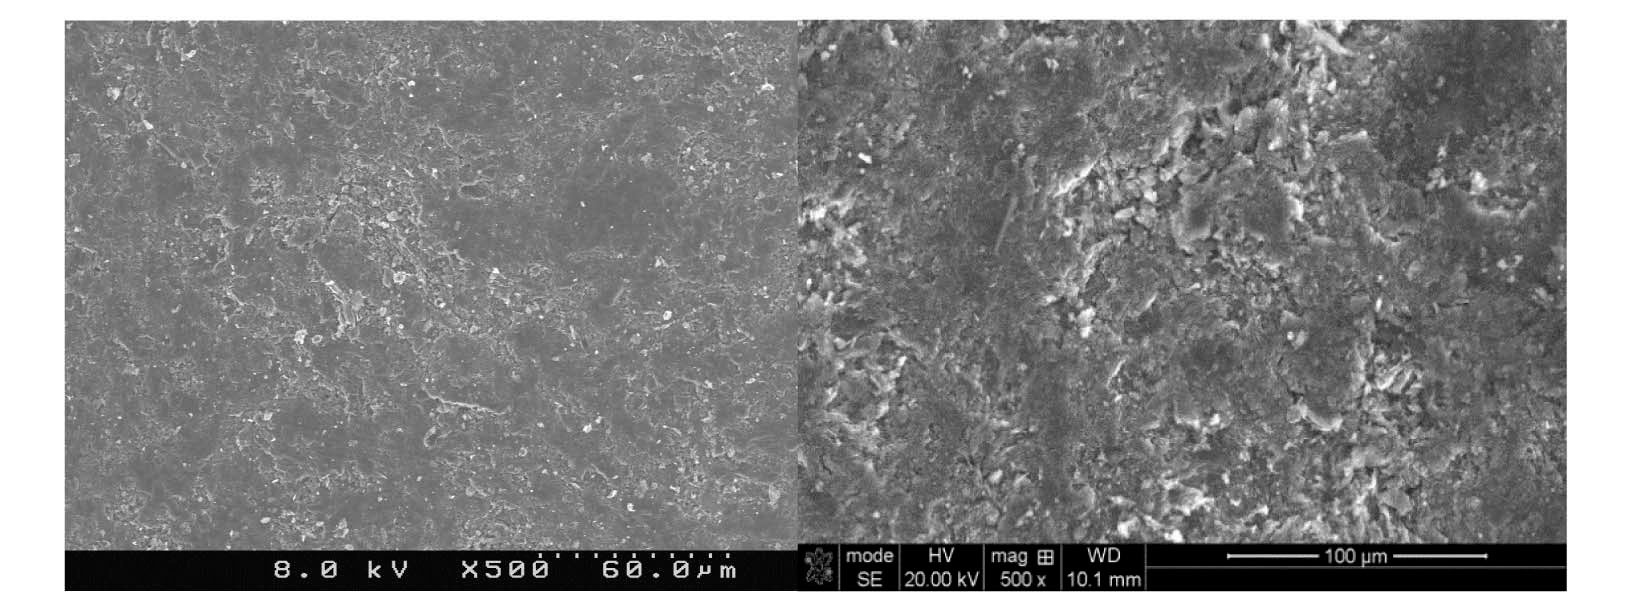 SEM Image of Unirradiated (Left) and Irradiated (Right) NBG-18 at 500x